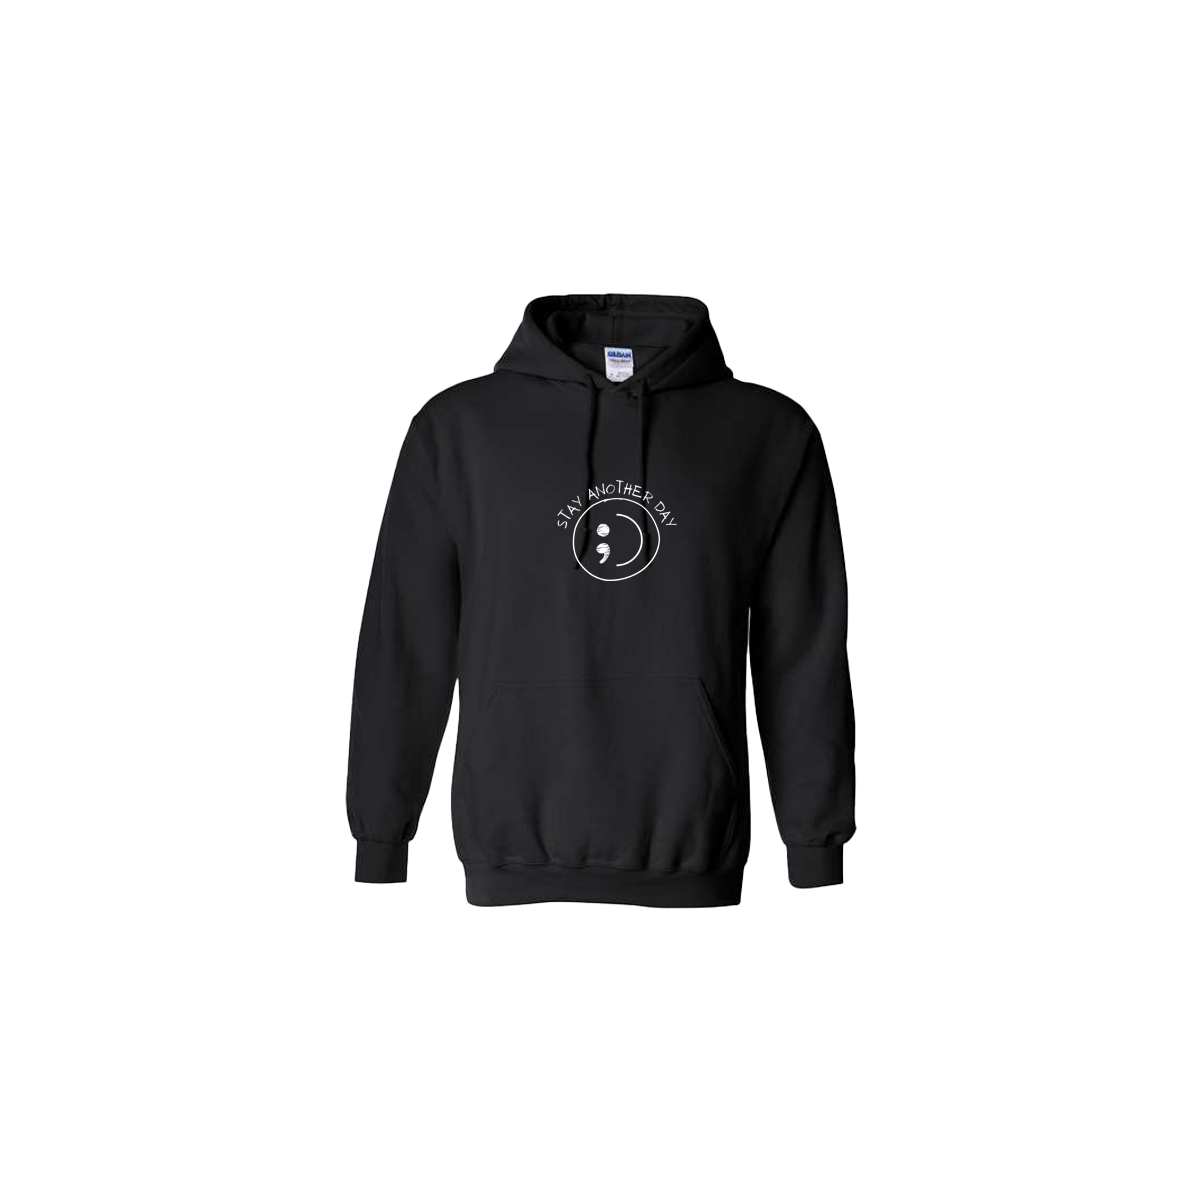 Stay Another Day Smiley Face Embroidered Black Hoodie - Mental Health Awareness Clothing